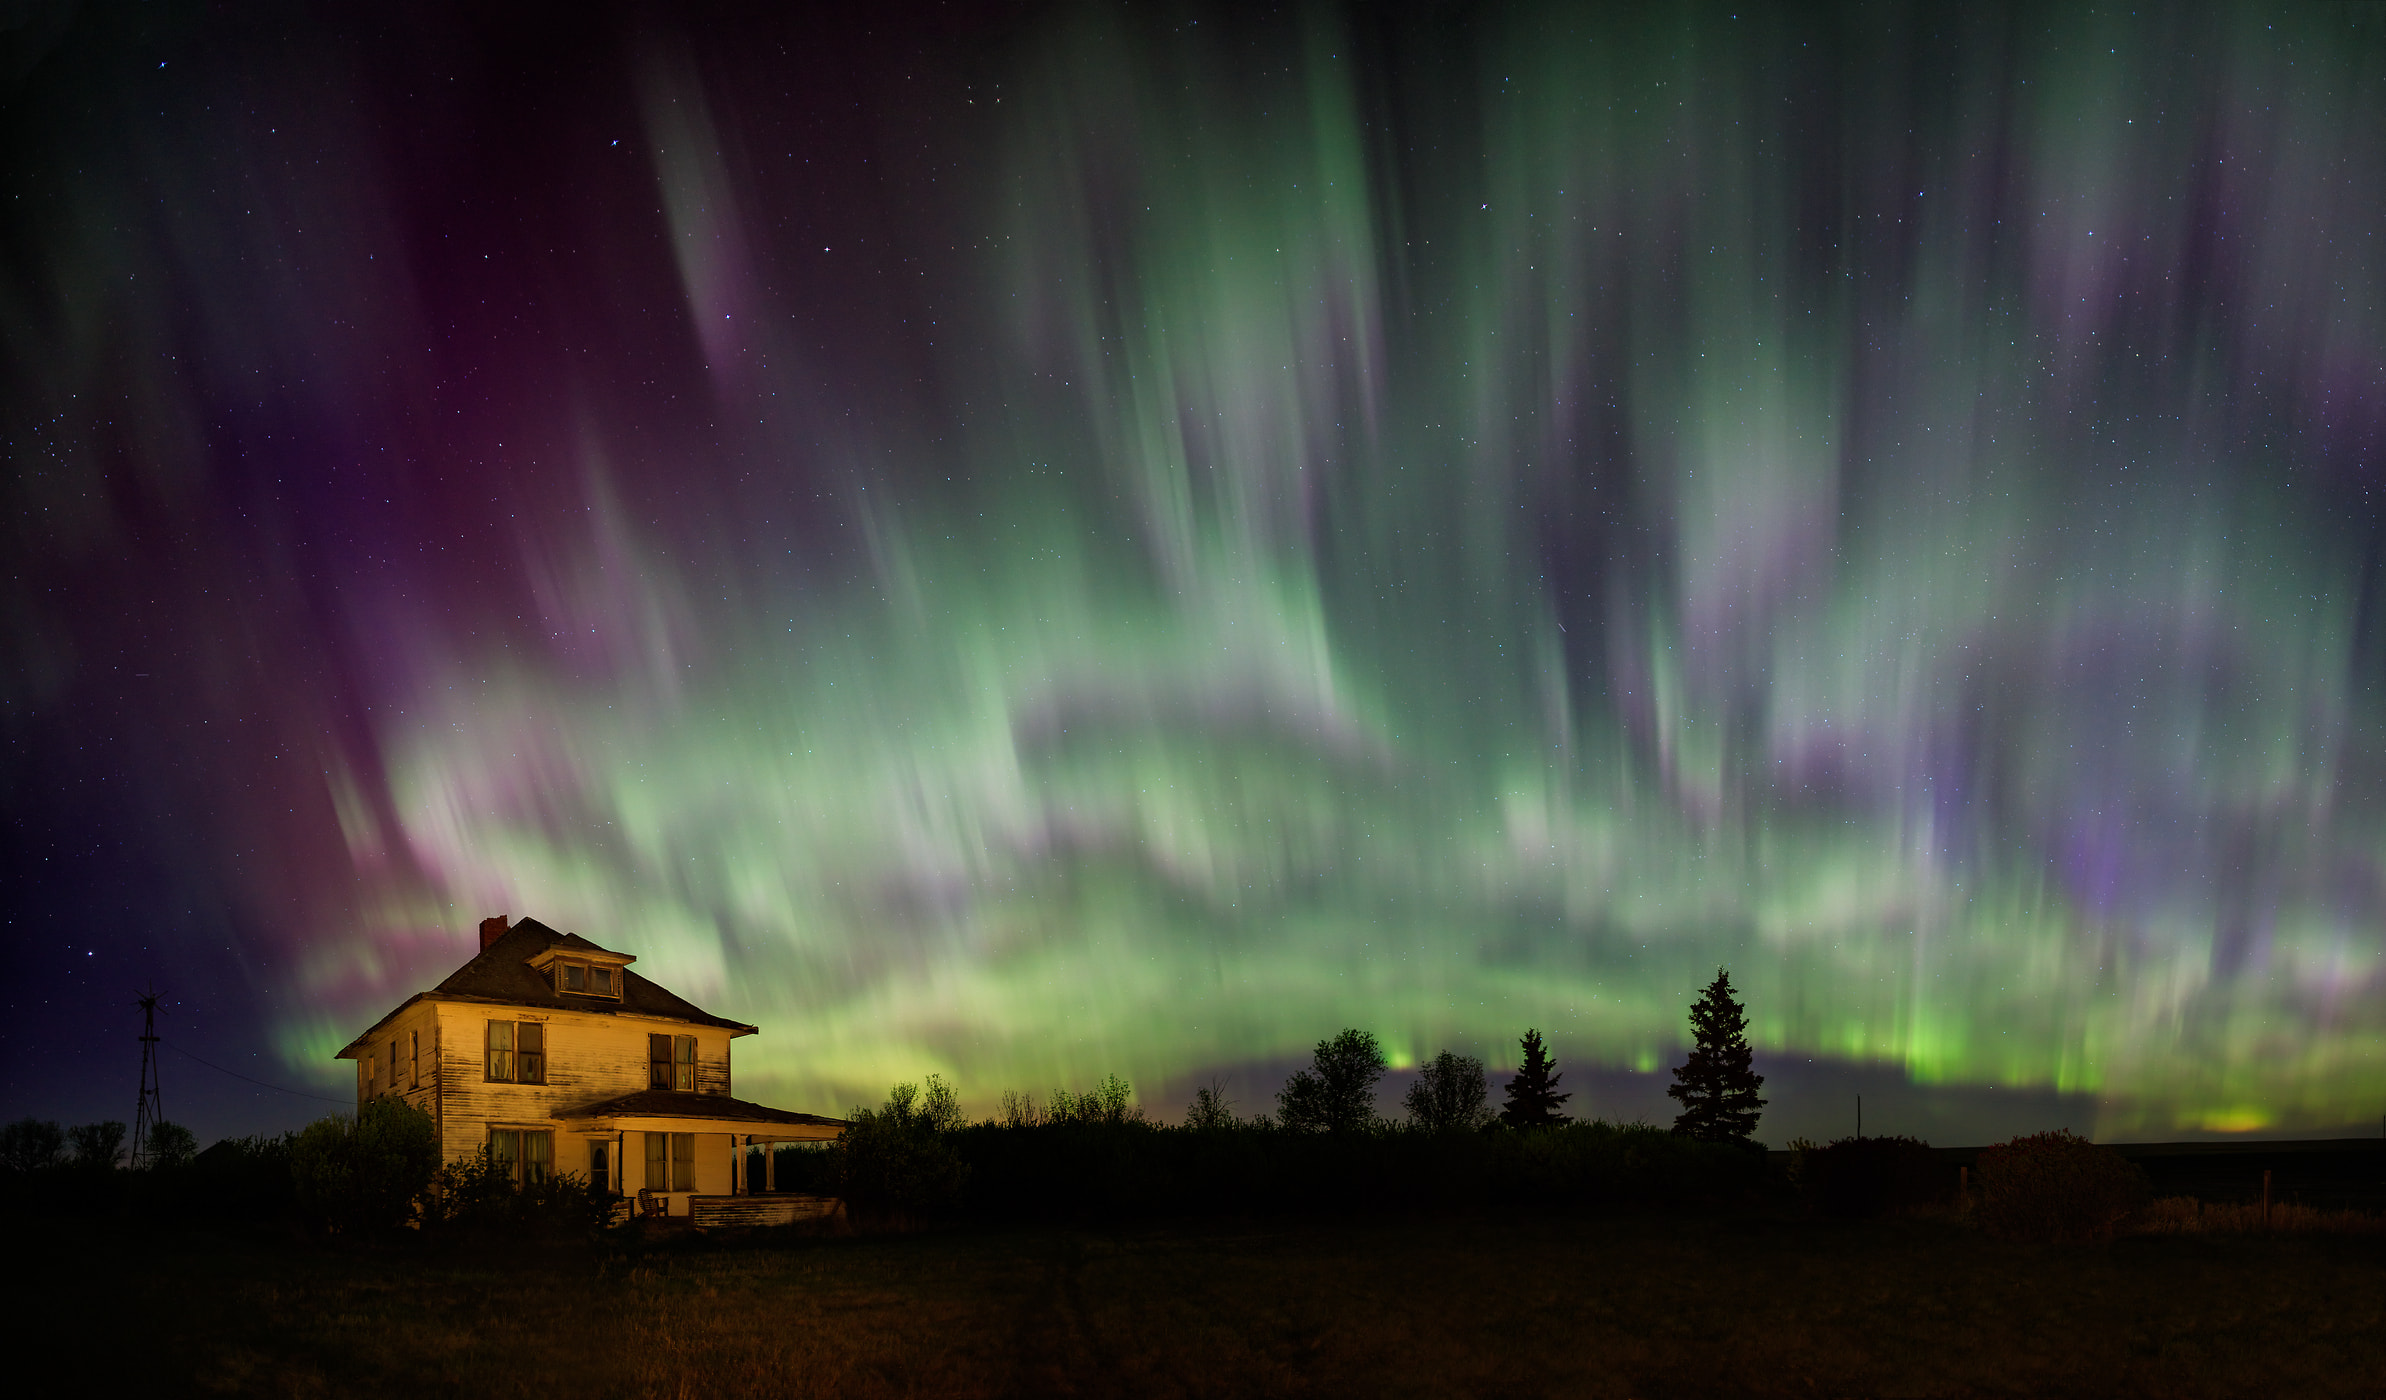 191 megapixels! A very high resolution, large-format VAST photo of an eerie creepy abandoned house under the Aurora Borealis Northern Lights; fine art landscape photo created by Scott Dimond in Alberta, Canada